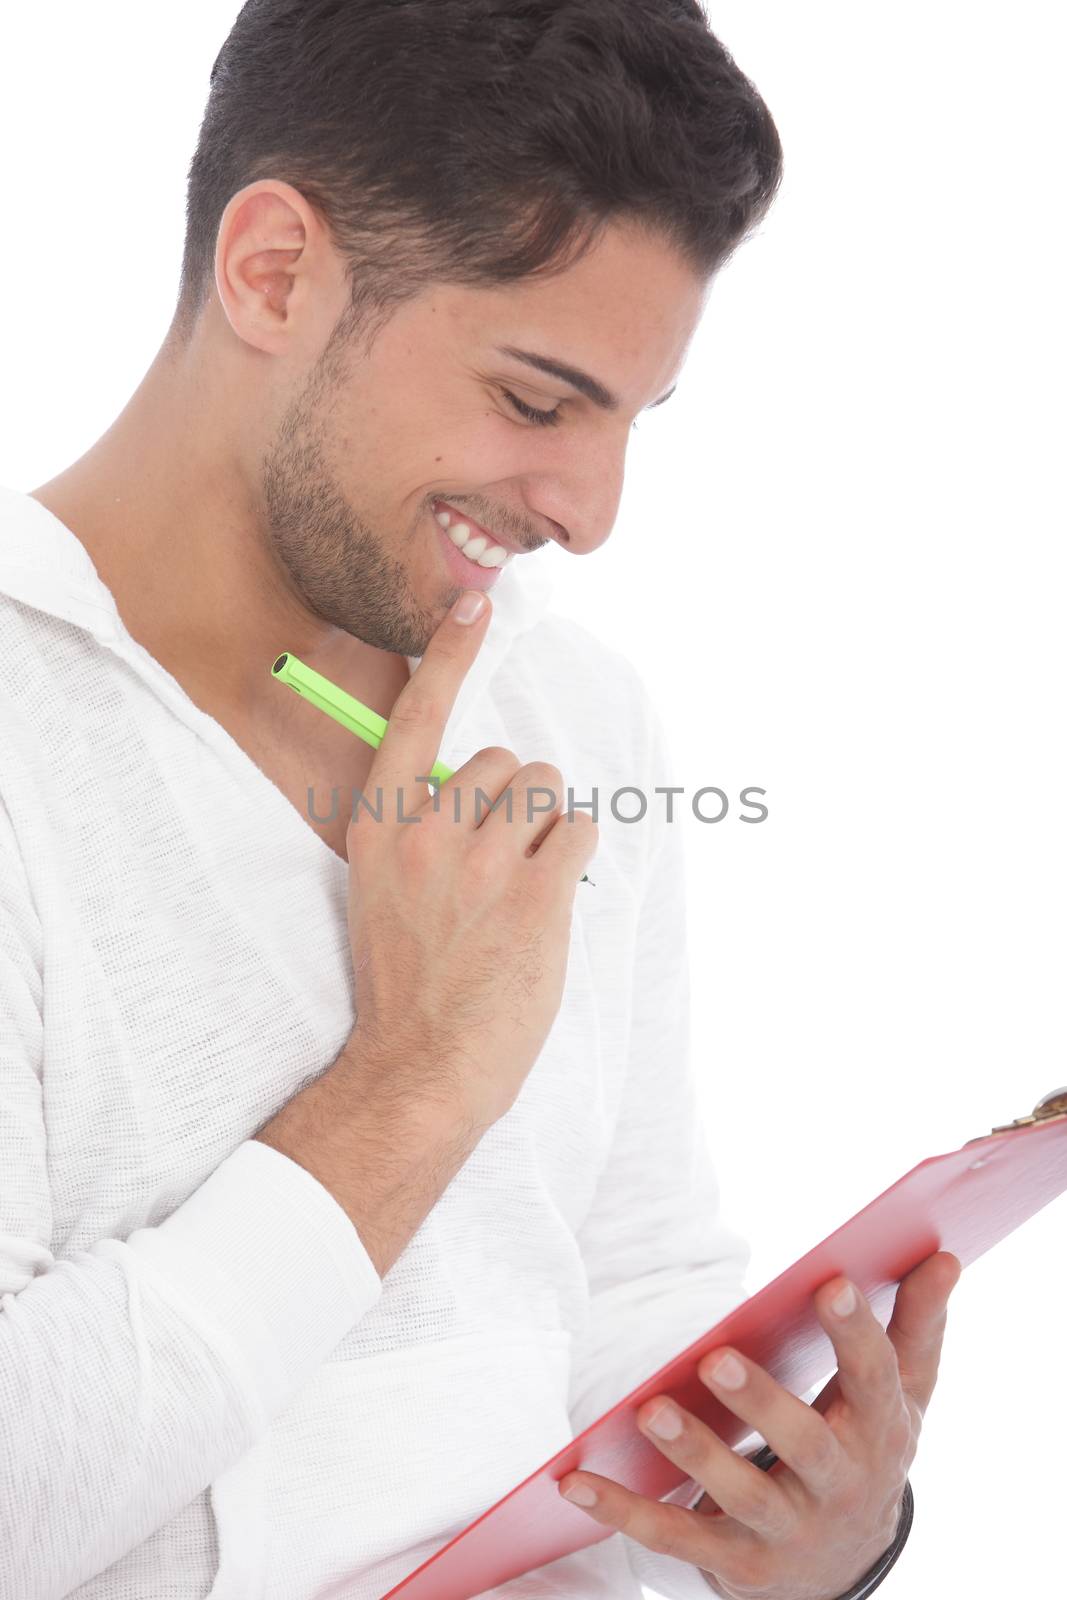 Man smiling as he reads notes on a clipboard by Farina6000